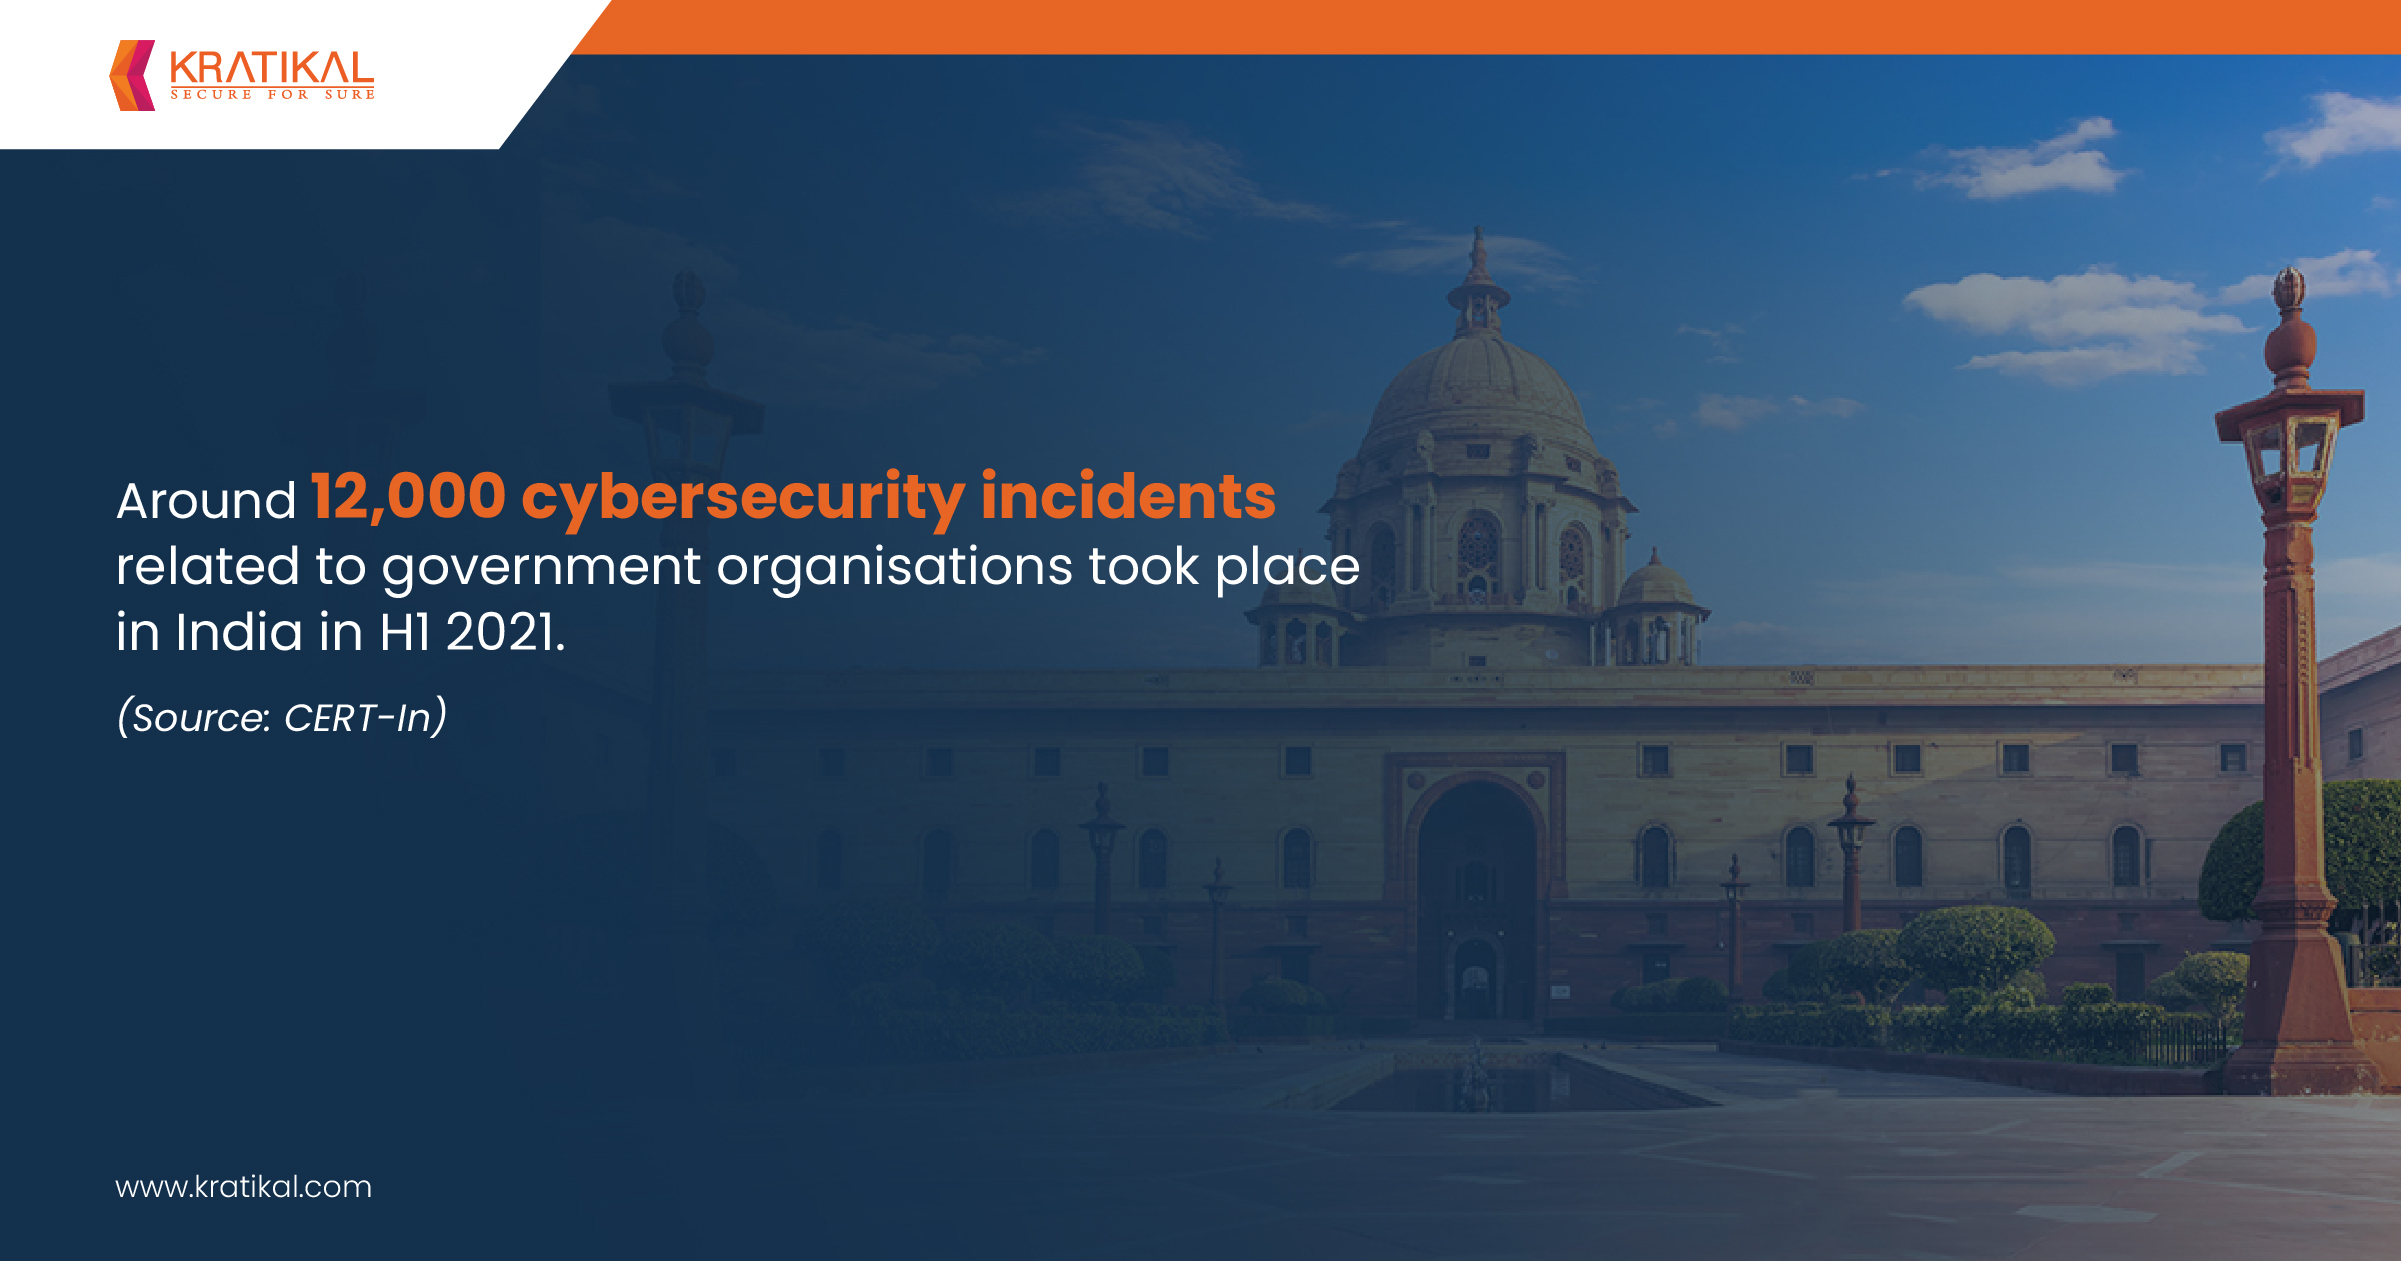 Cyber Attacks on Government Institutions in India